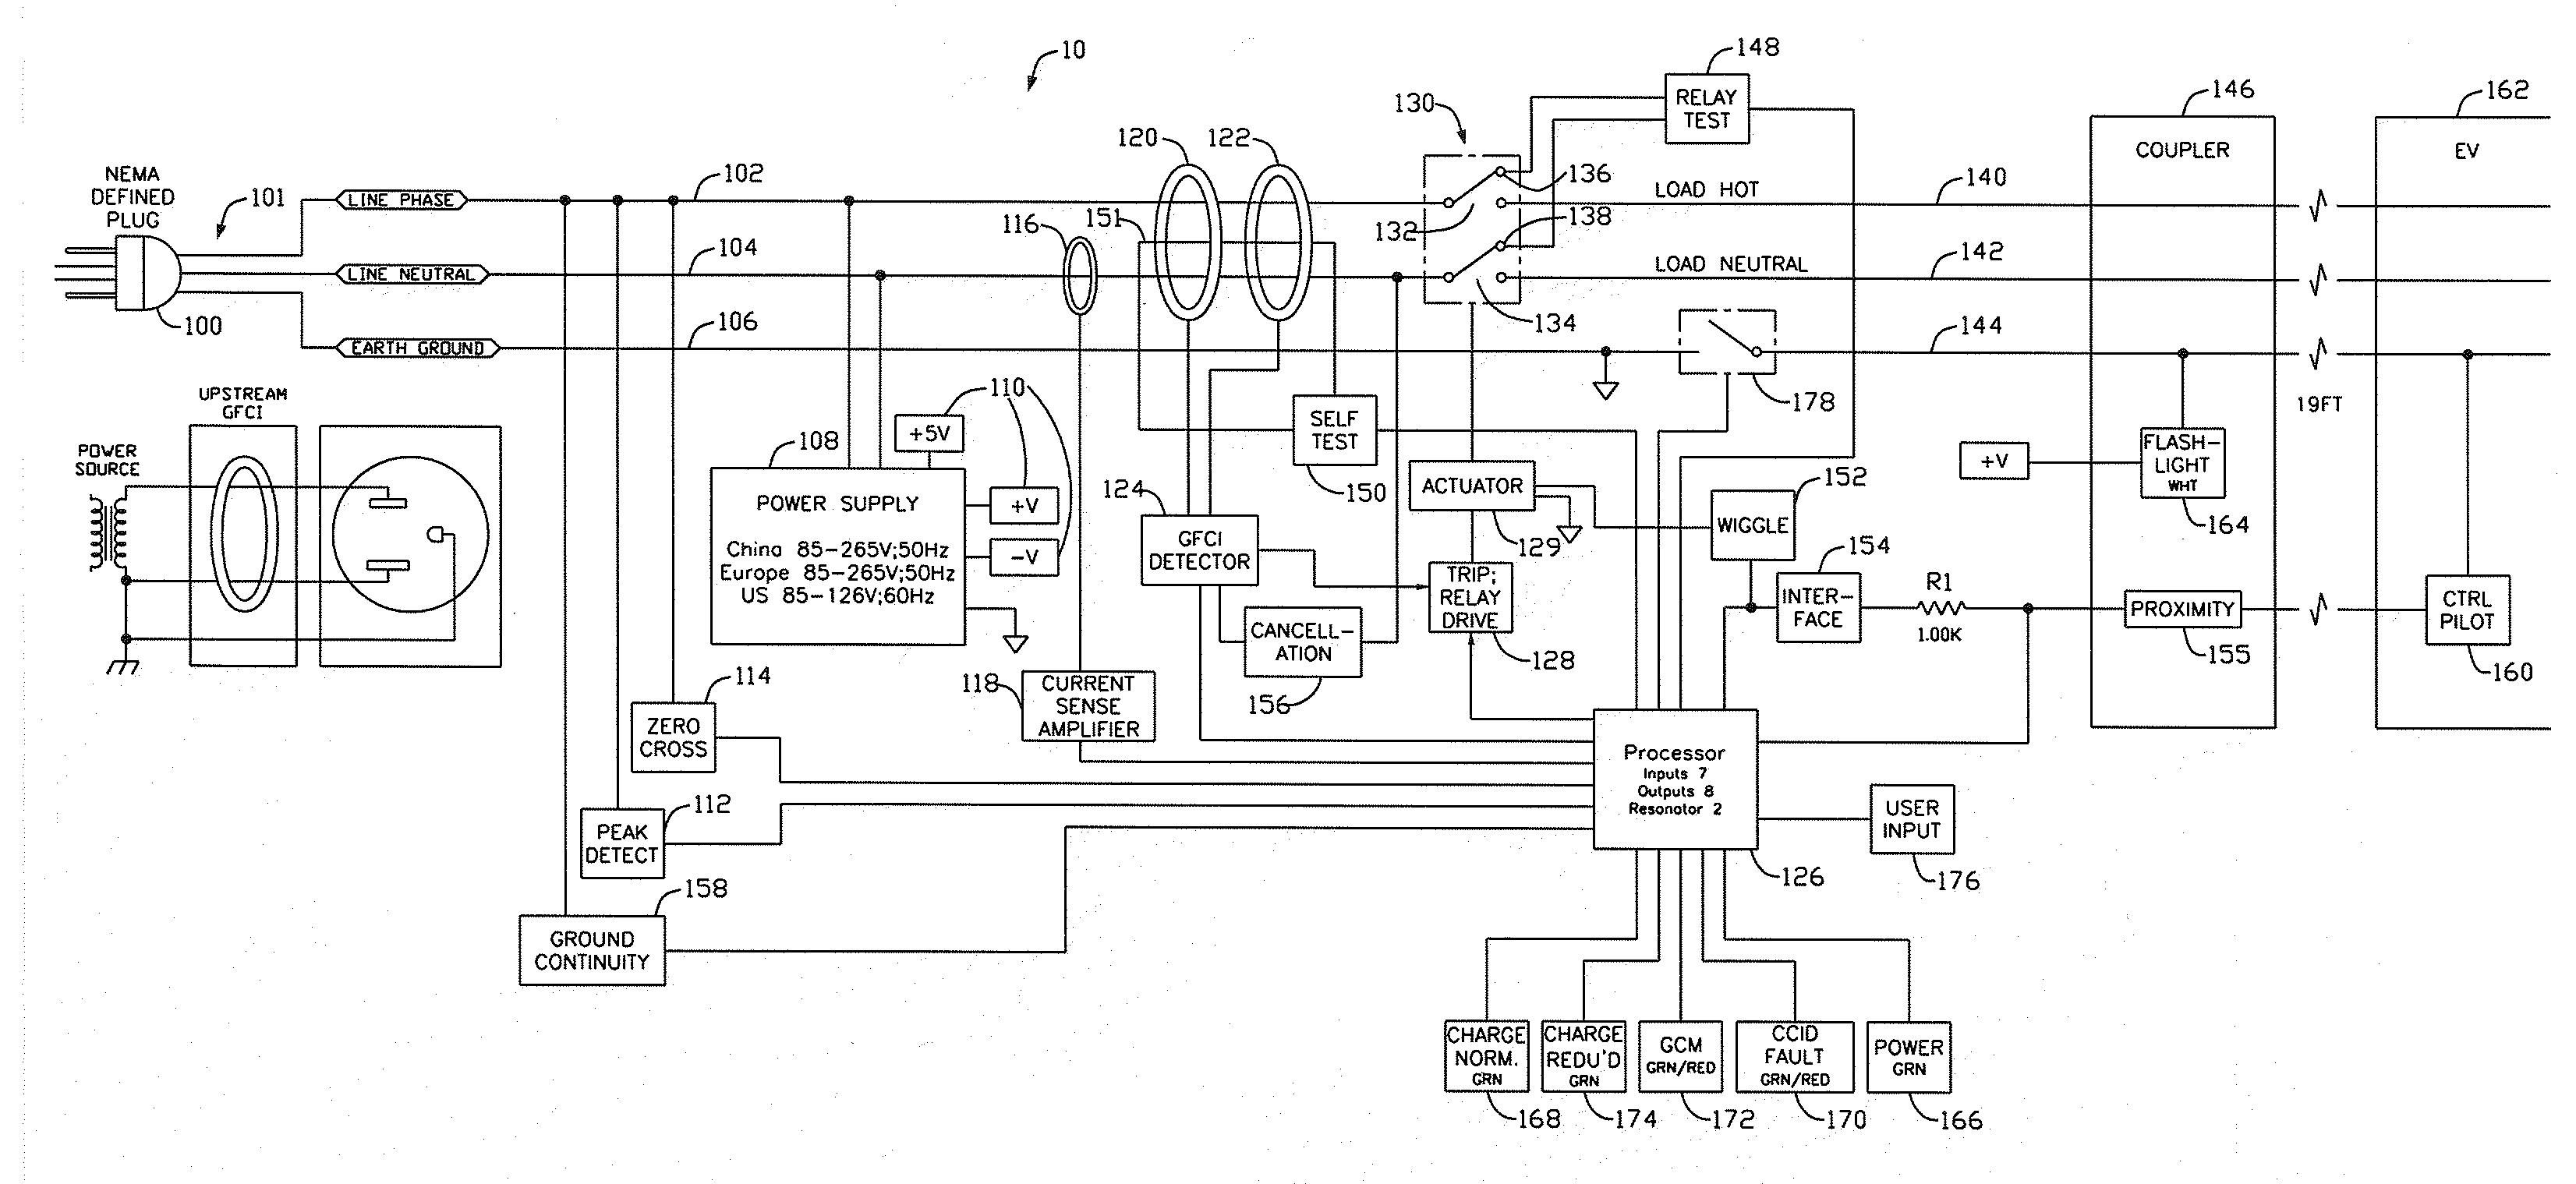 Protective device for an electrical supply facility